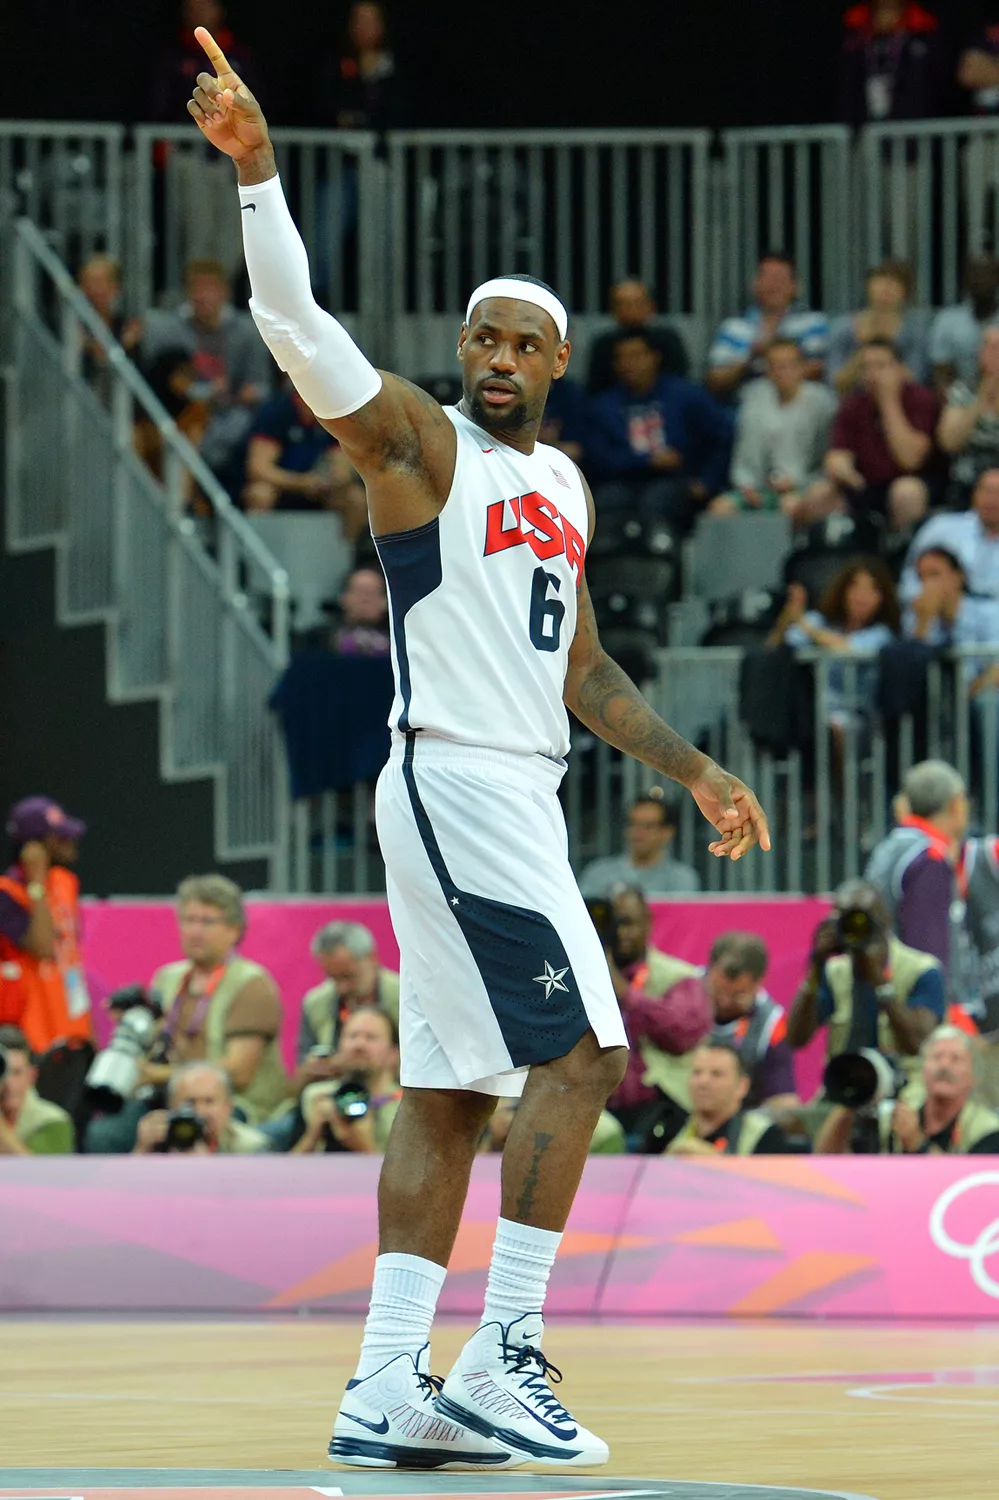 LeBron James #6 of the USA Mens Senior National team points during the game against France at the Olympic Park Basketball Arena during the London Olympic Games on July 29, 2012